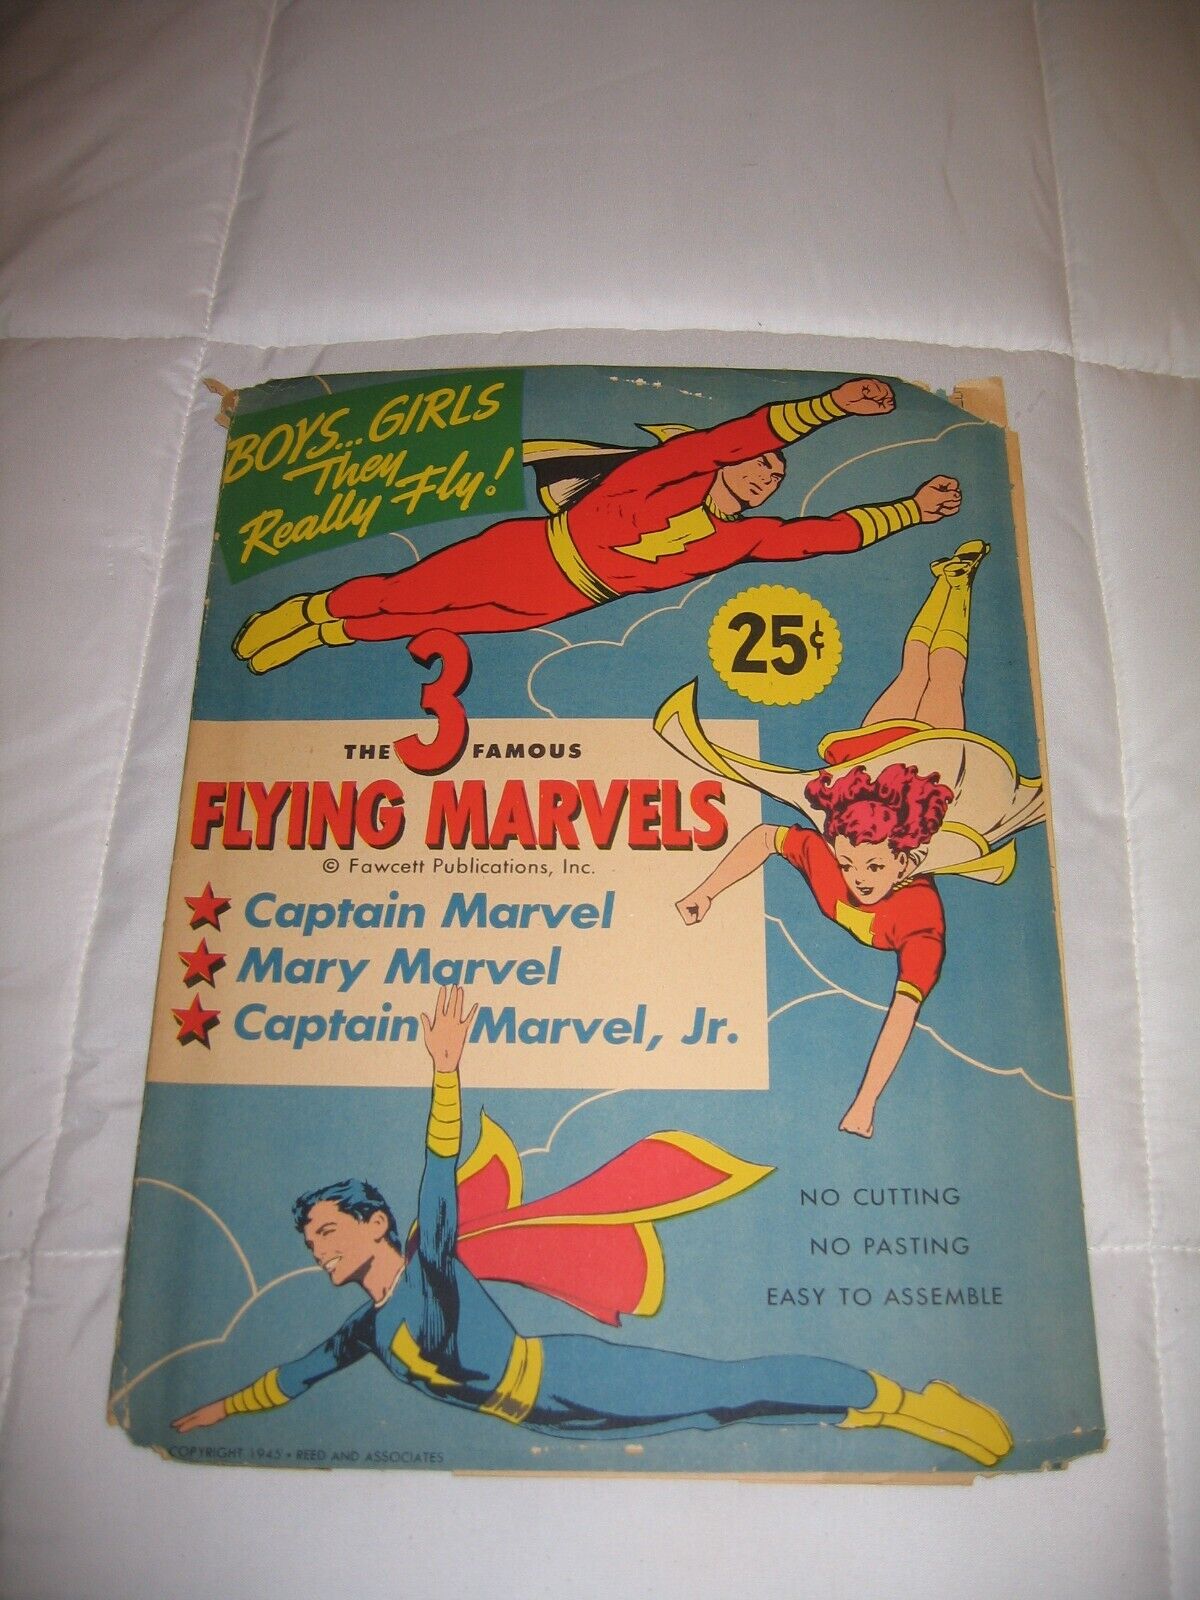 Vintage 1945 The 3 Famous Flying Marvels Captain Marvel Comic Book Craft